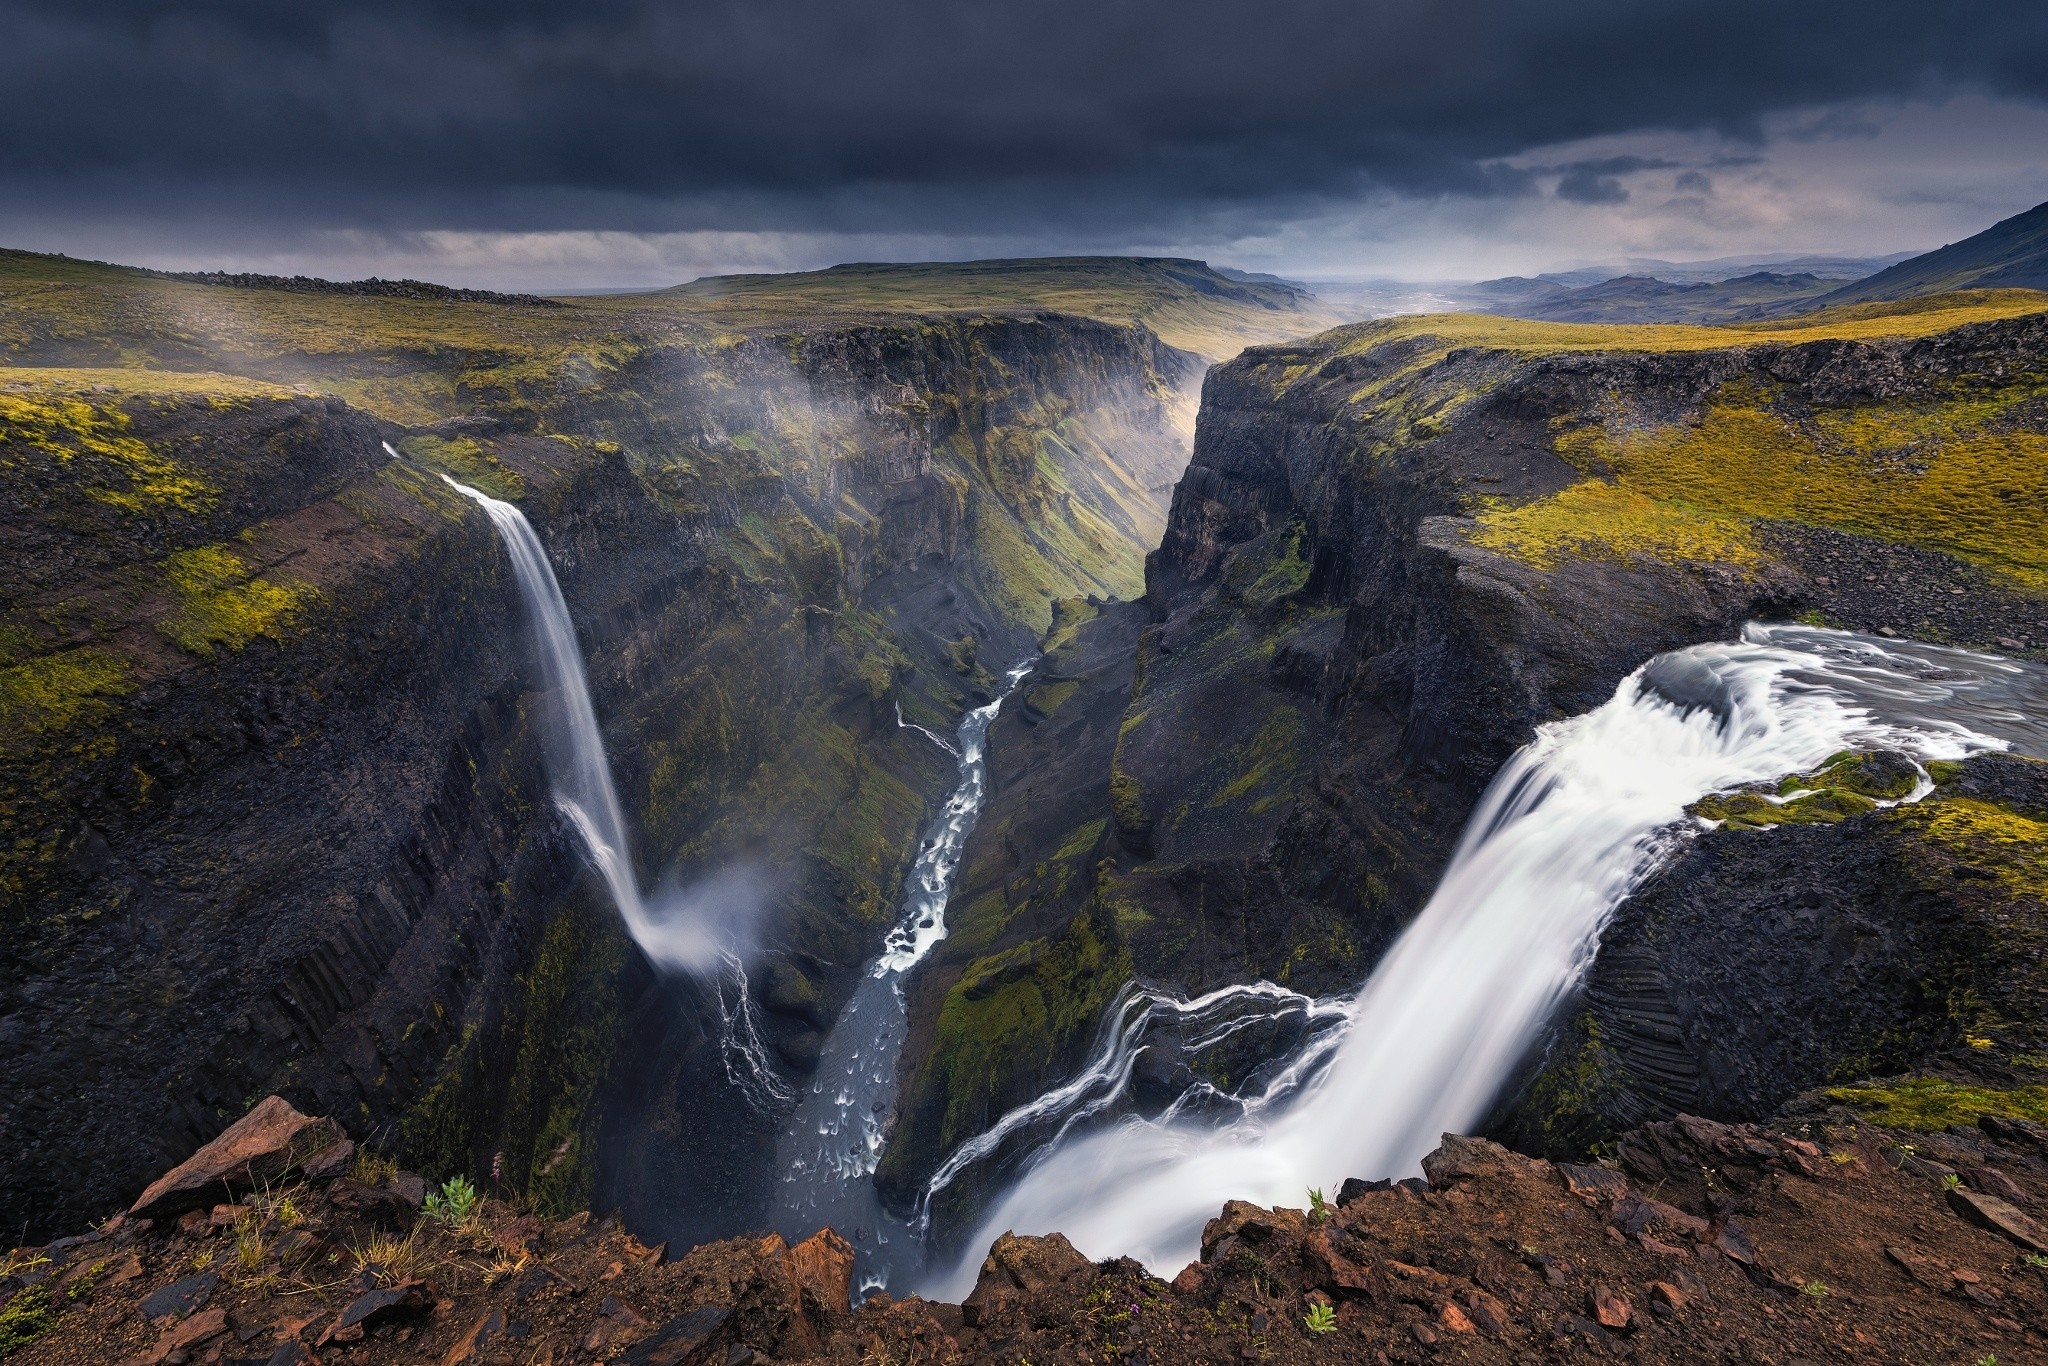 General 2048x1366 landscape nature waterfall canyon river dark clouds Iceland